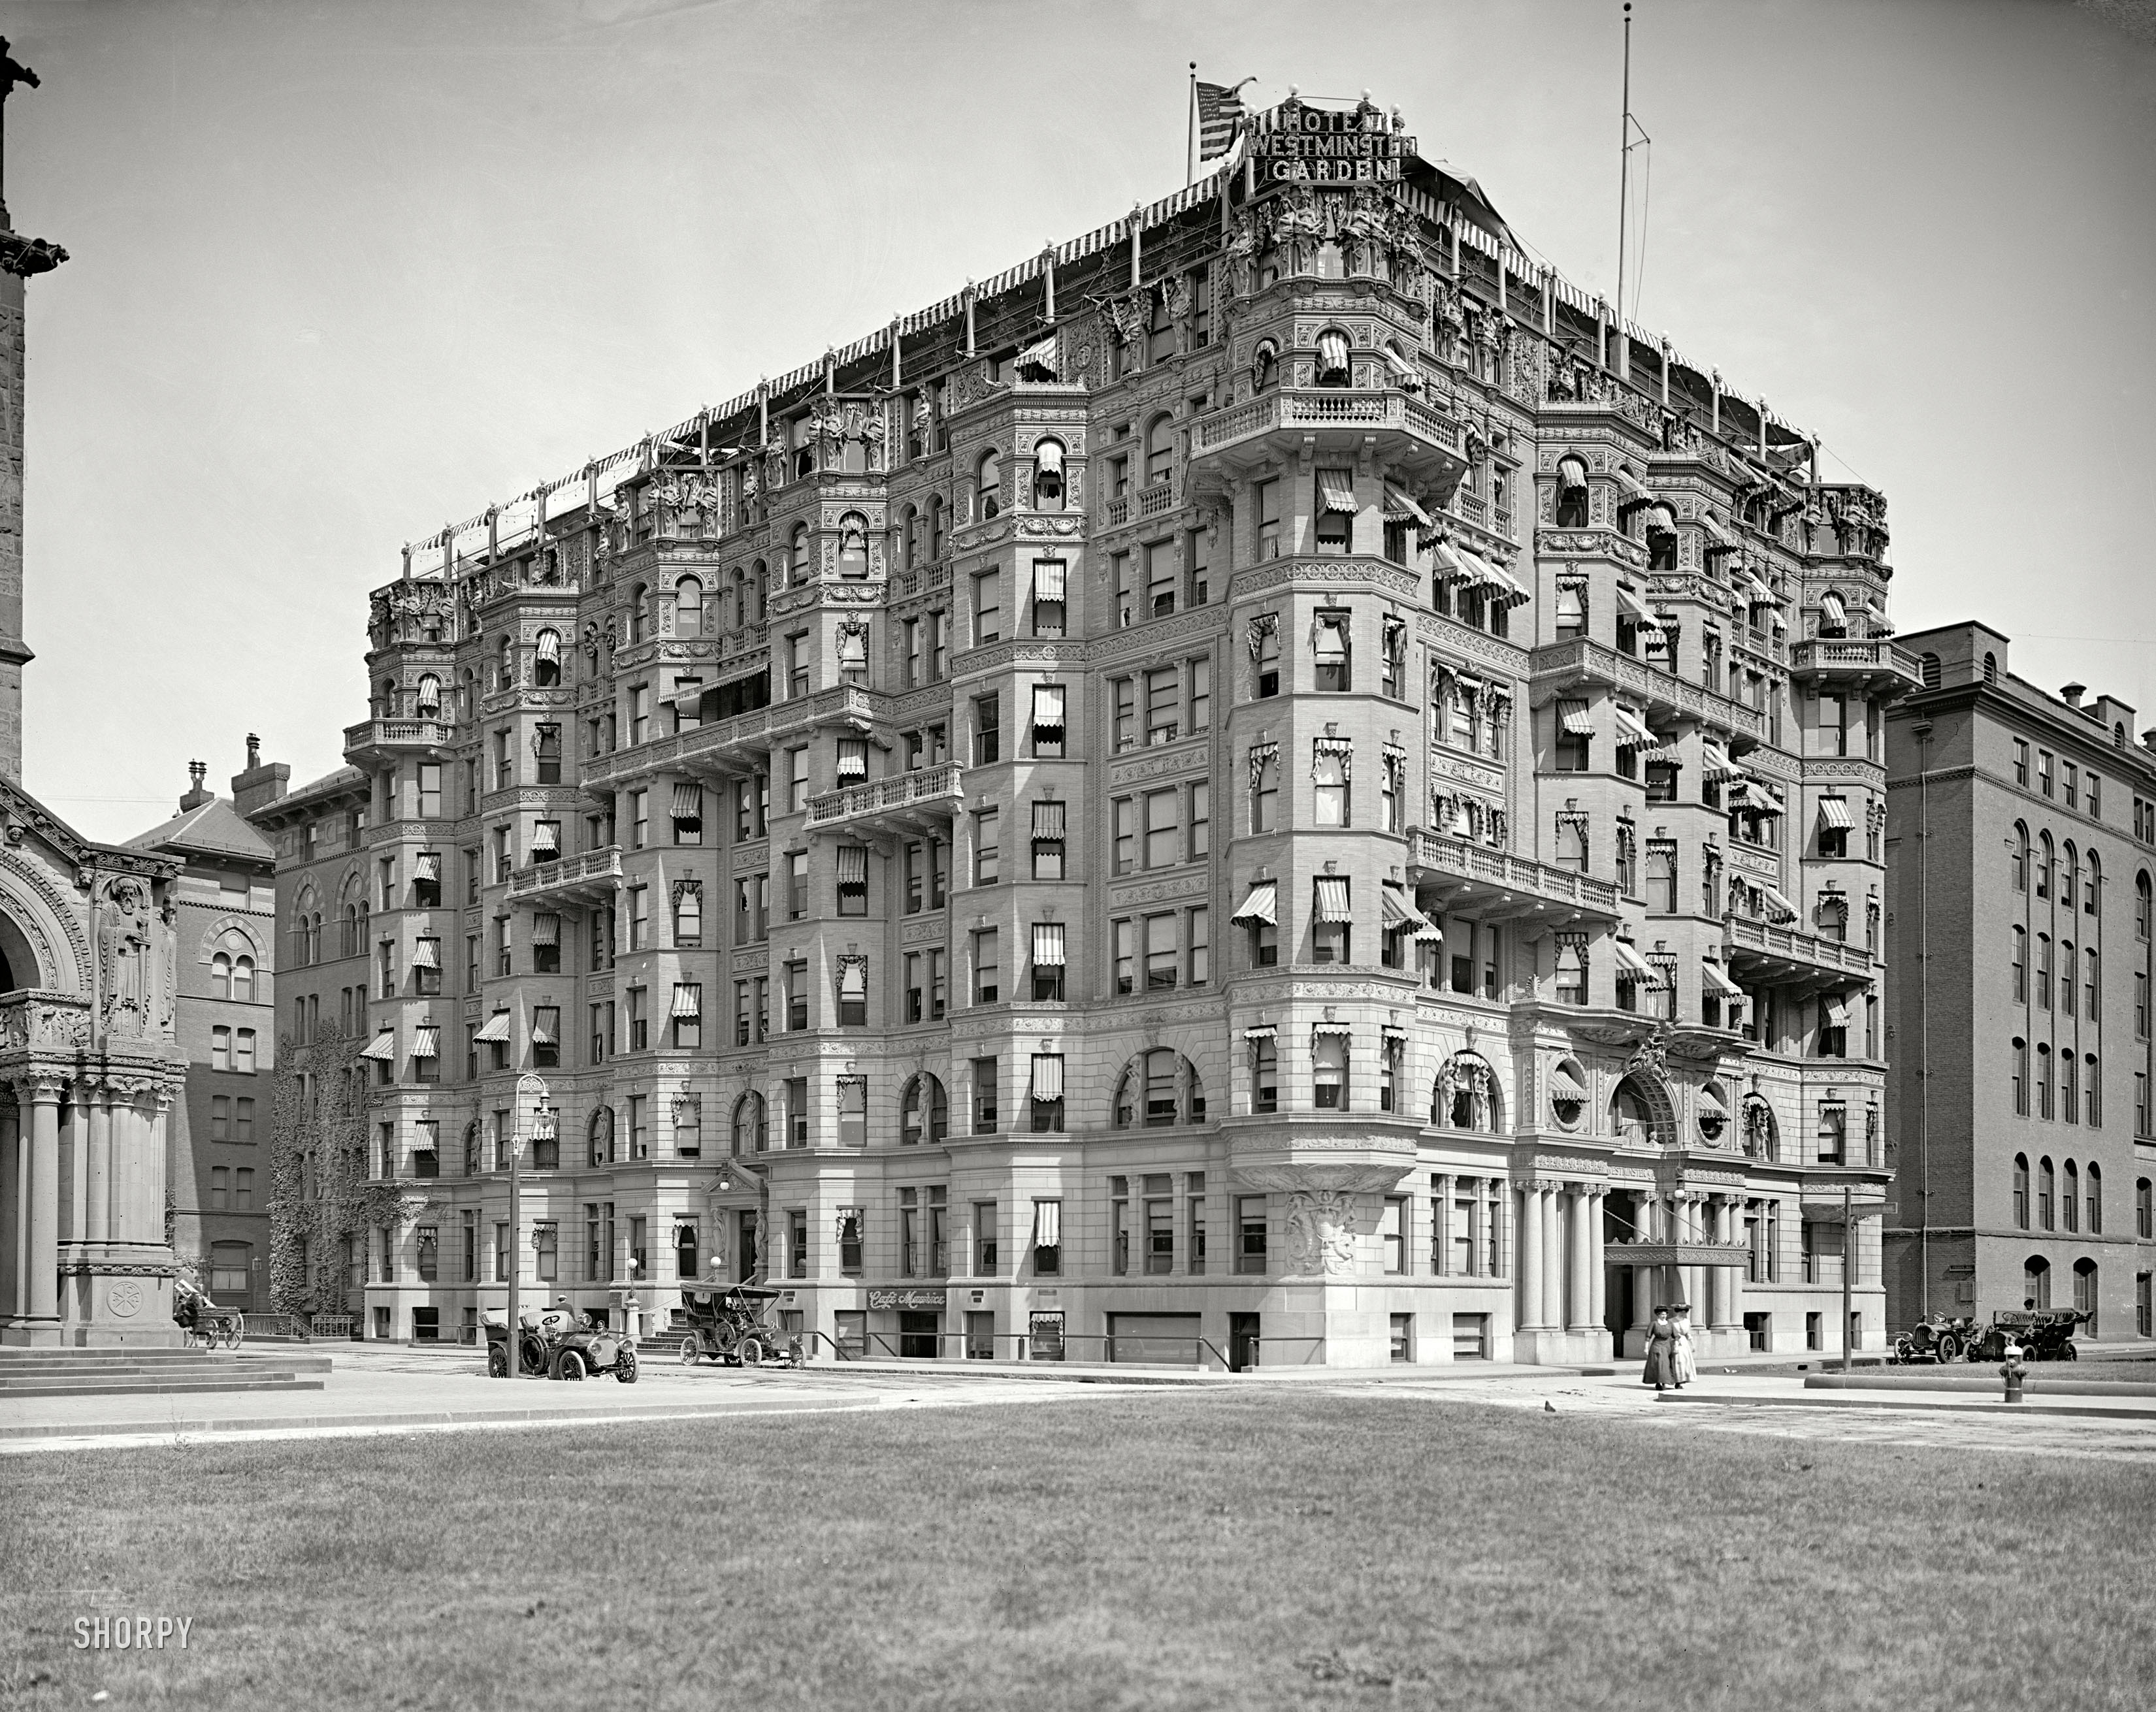 Boston, Massachusetts, circa 1908. "Hotel Westminster." Equipped with a bevy of bay windows as well as the de rigueur roof garden restaurant. View full size.